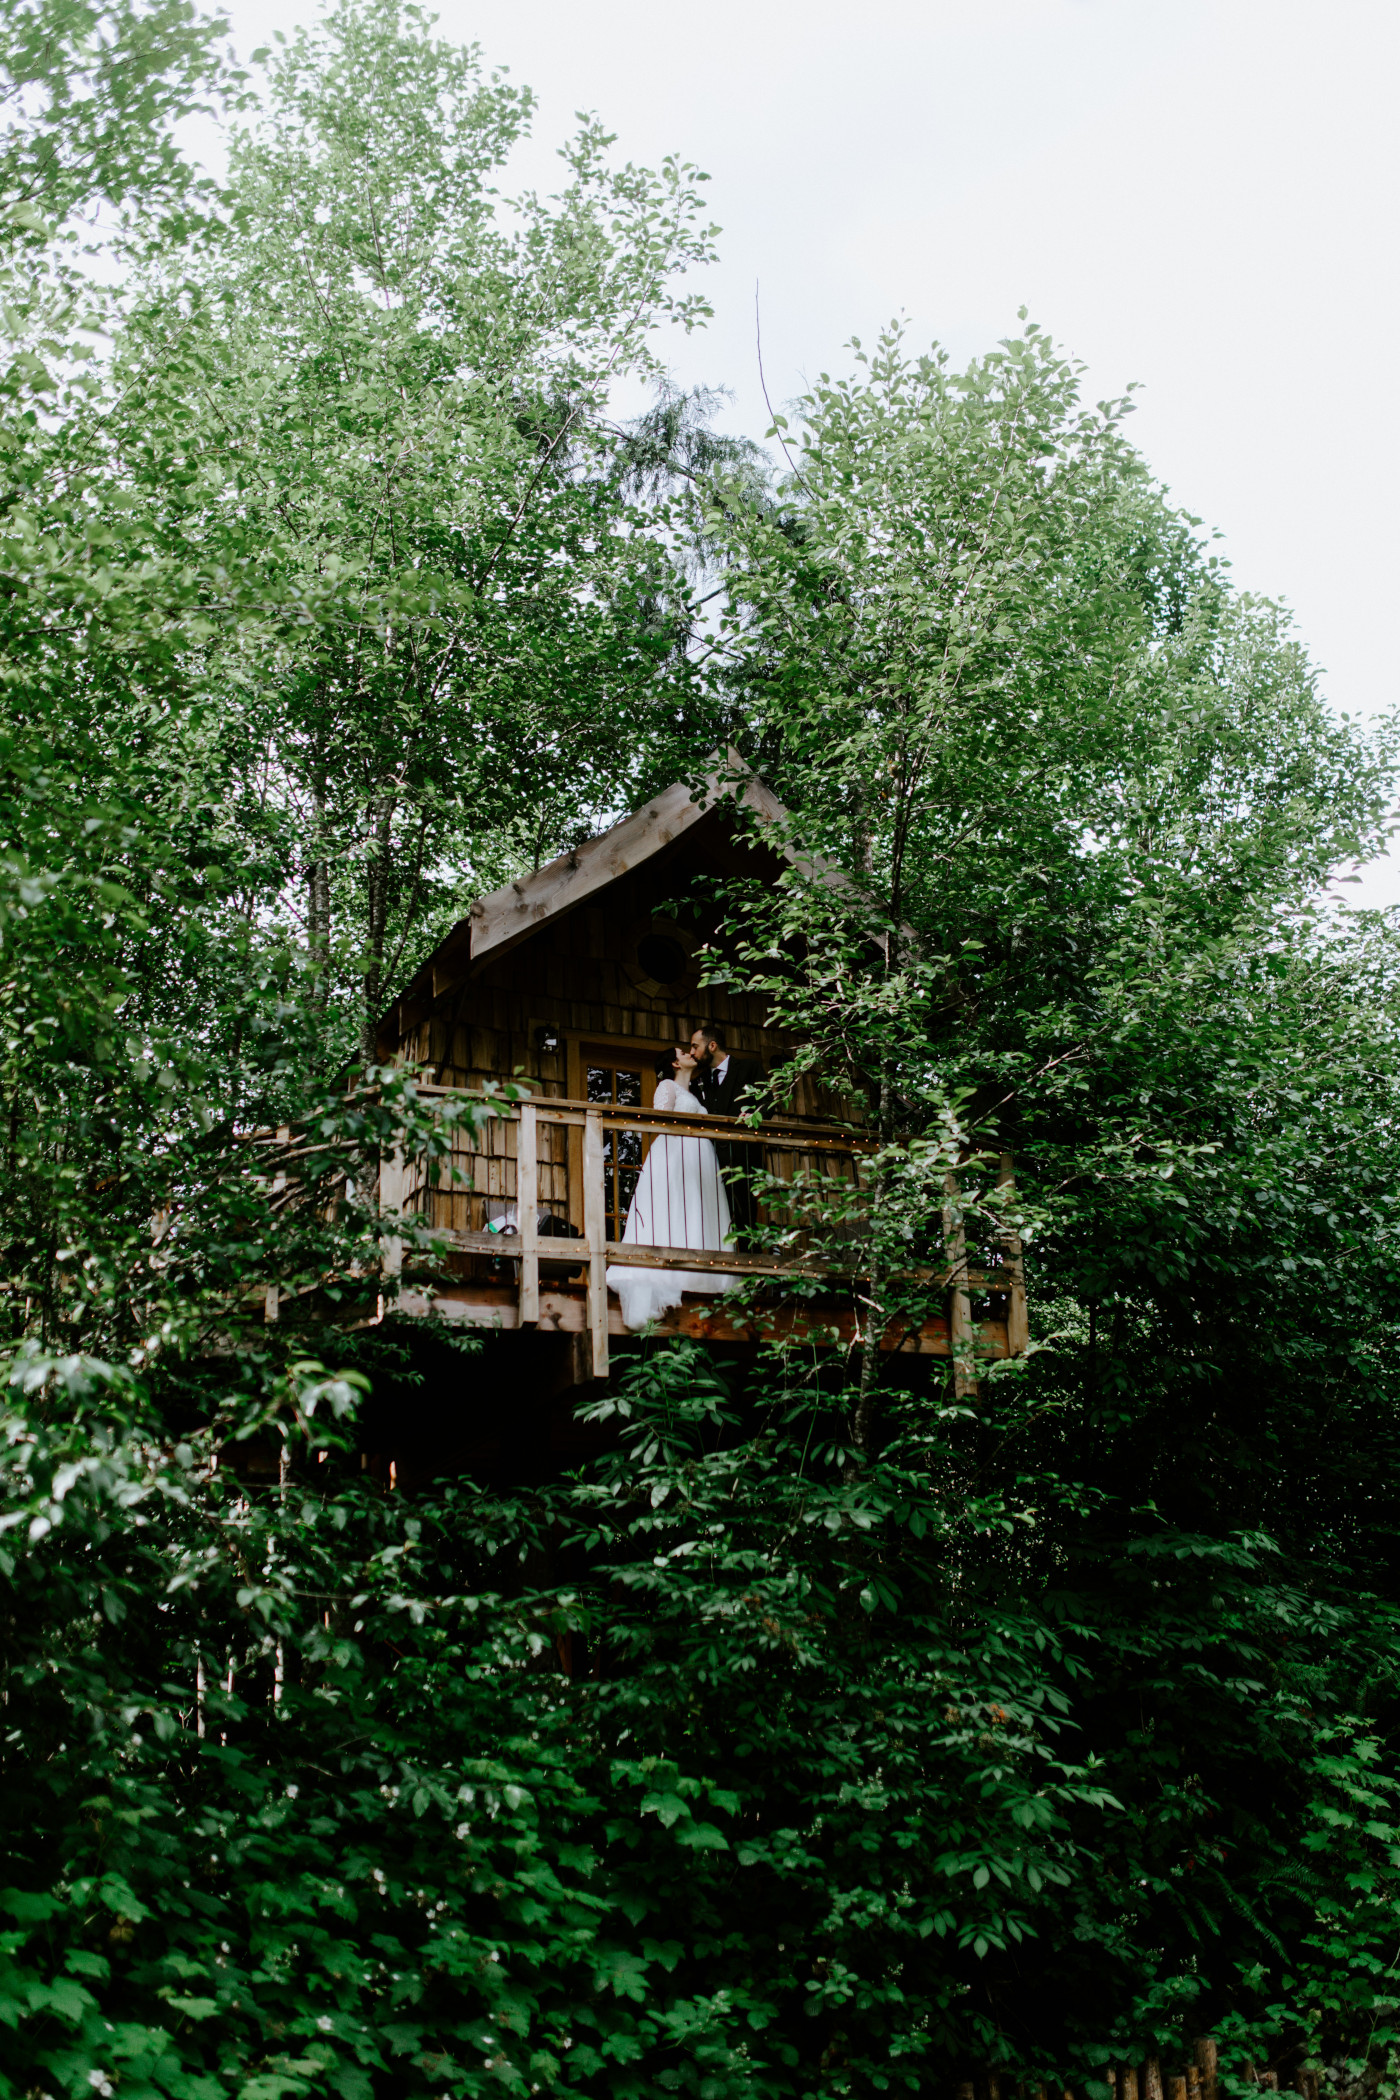 Elizabeth and Alex in an AirBnB treehouse. Elopement photography at North Cascades National Park by Sienna Plus Josh.